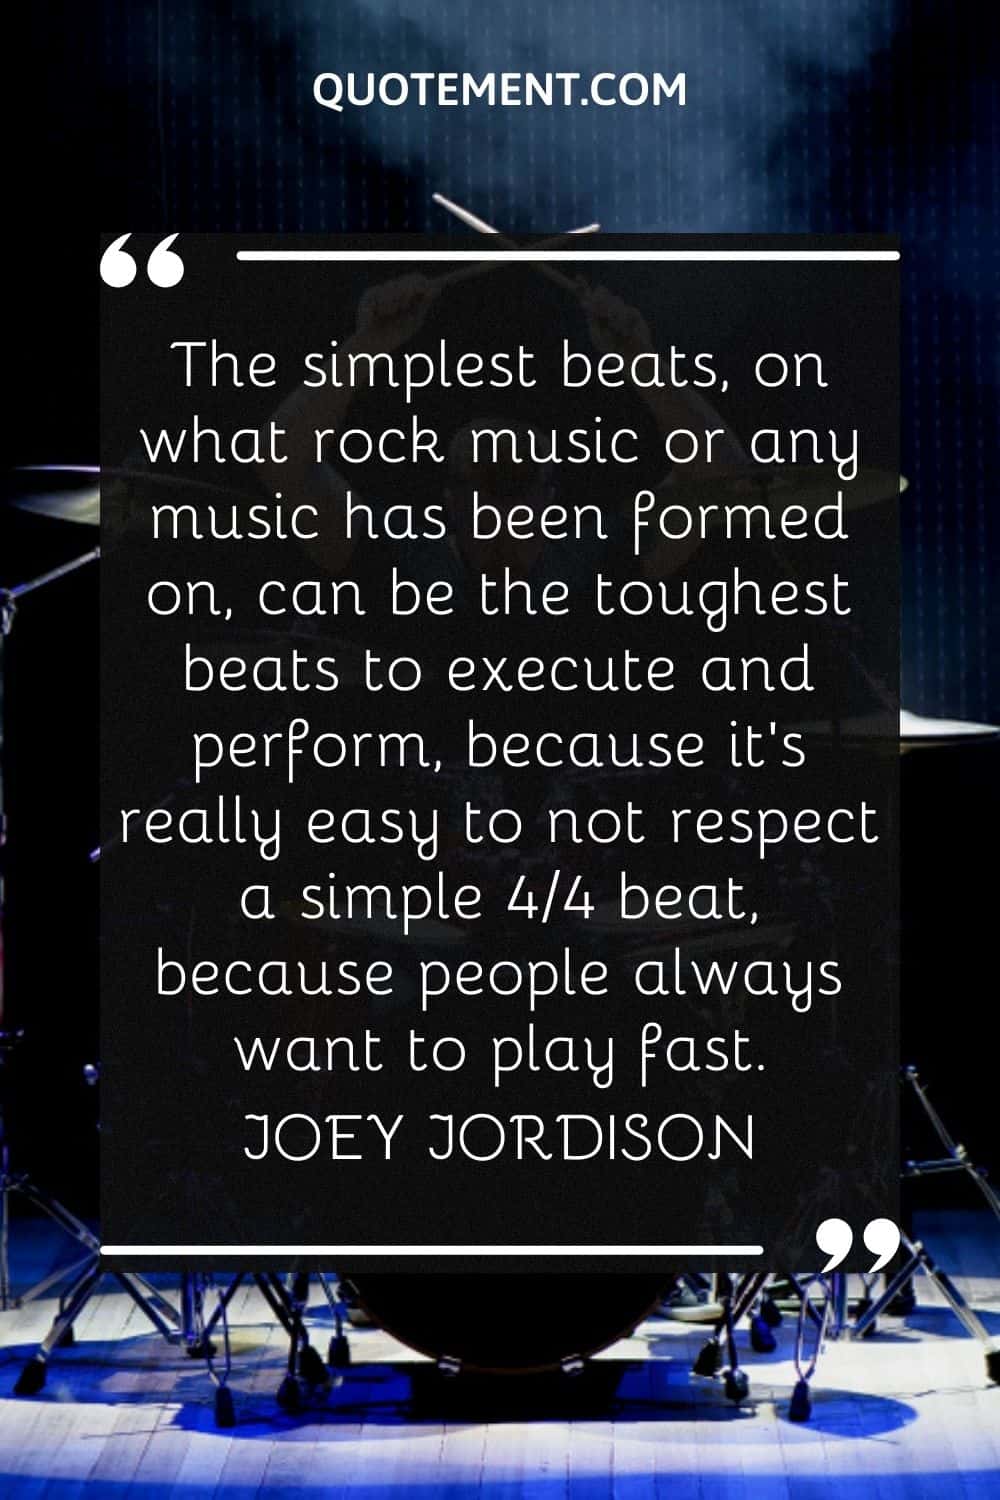 The simplest beats, on what rock music or any music has been formed on, can be the toughest beats to execute and perform